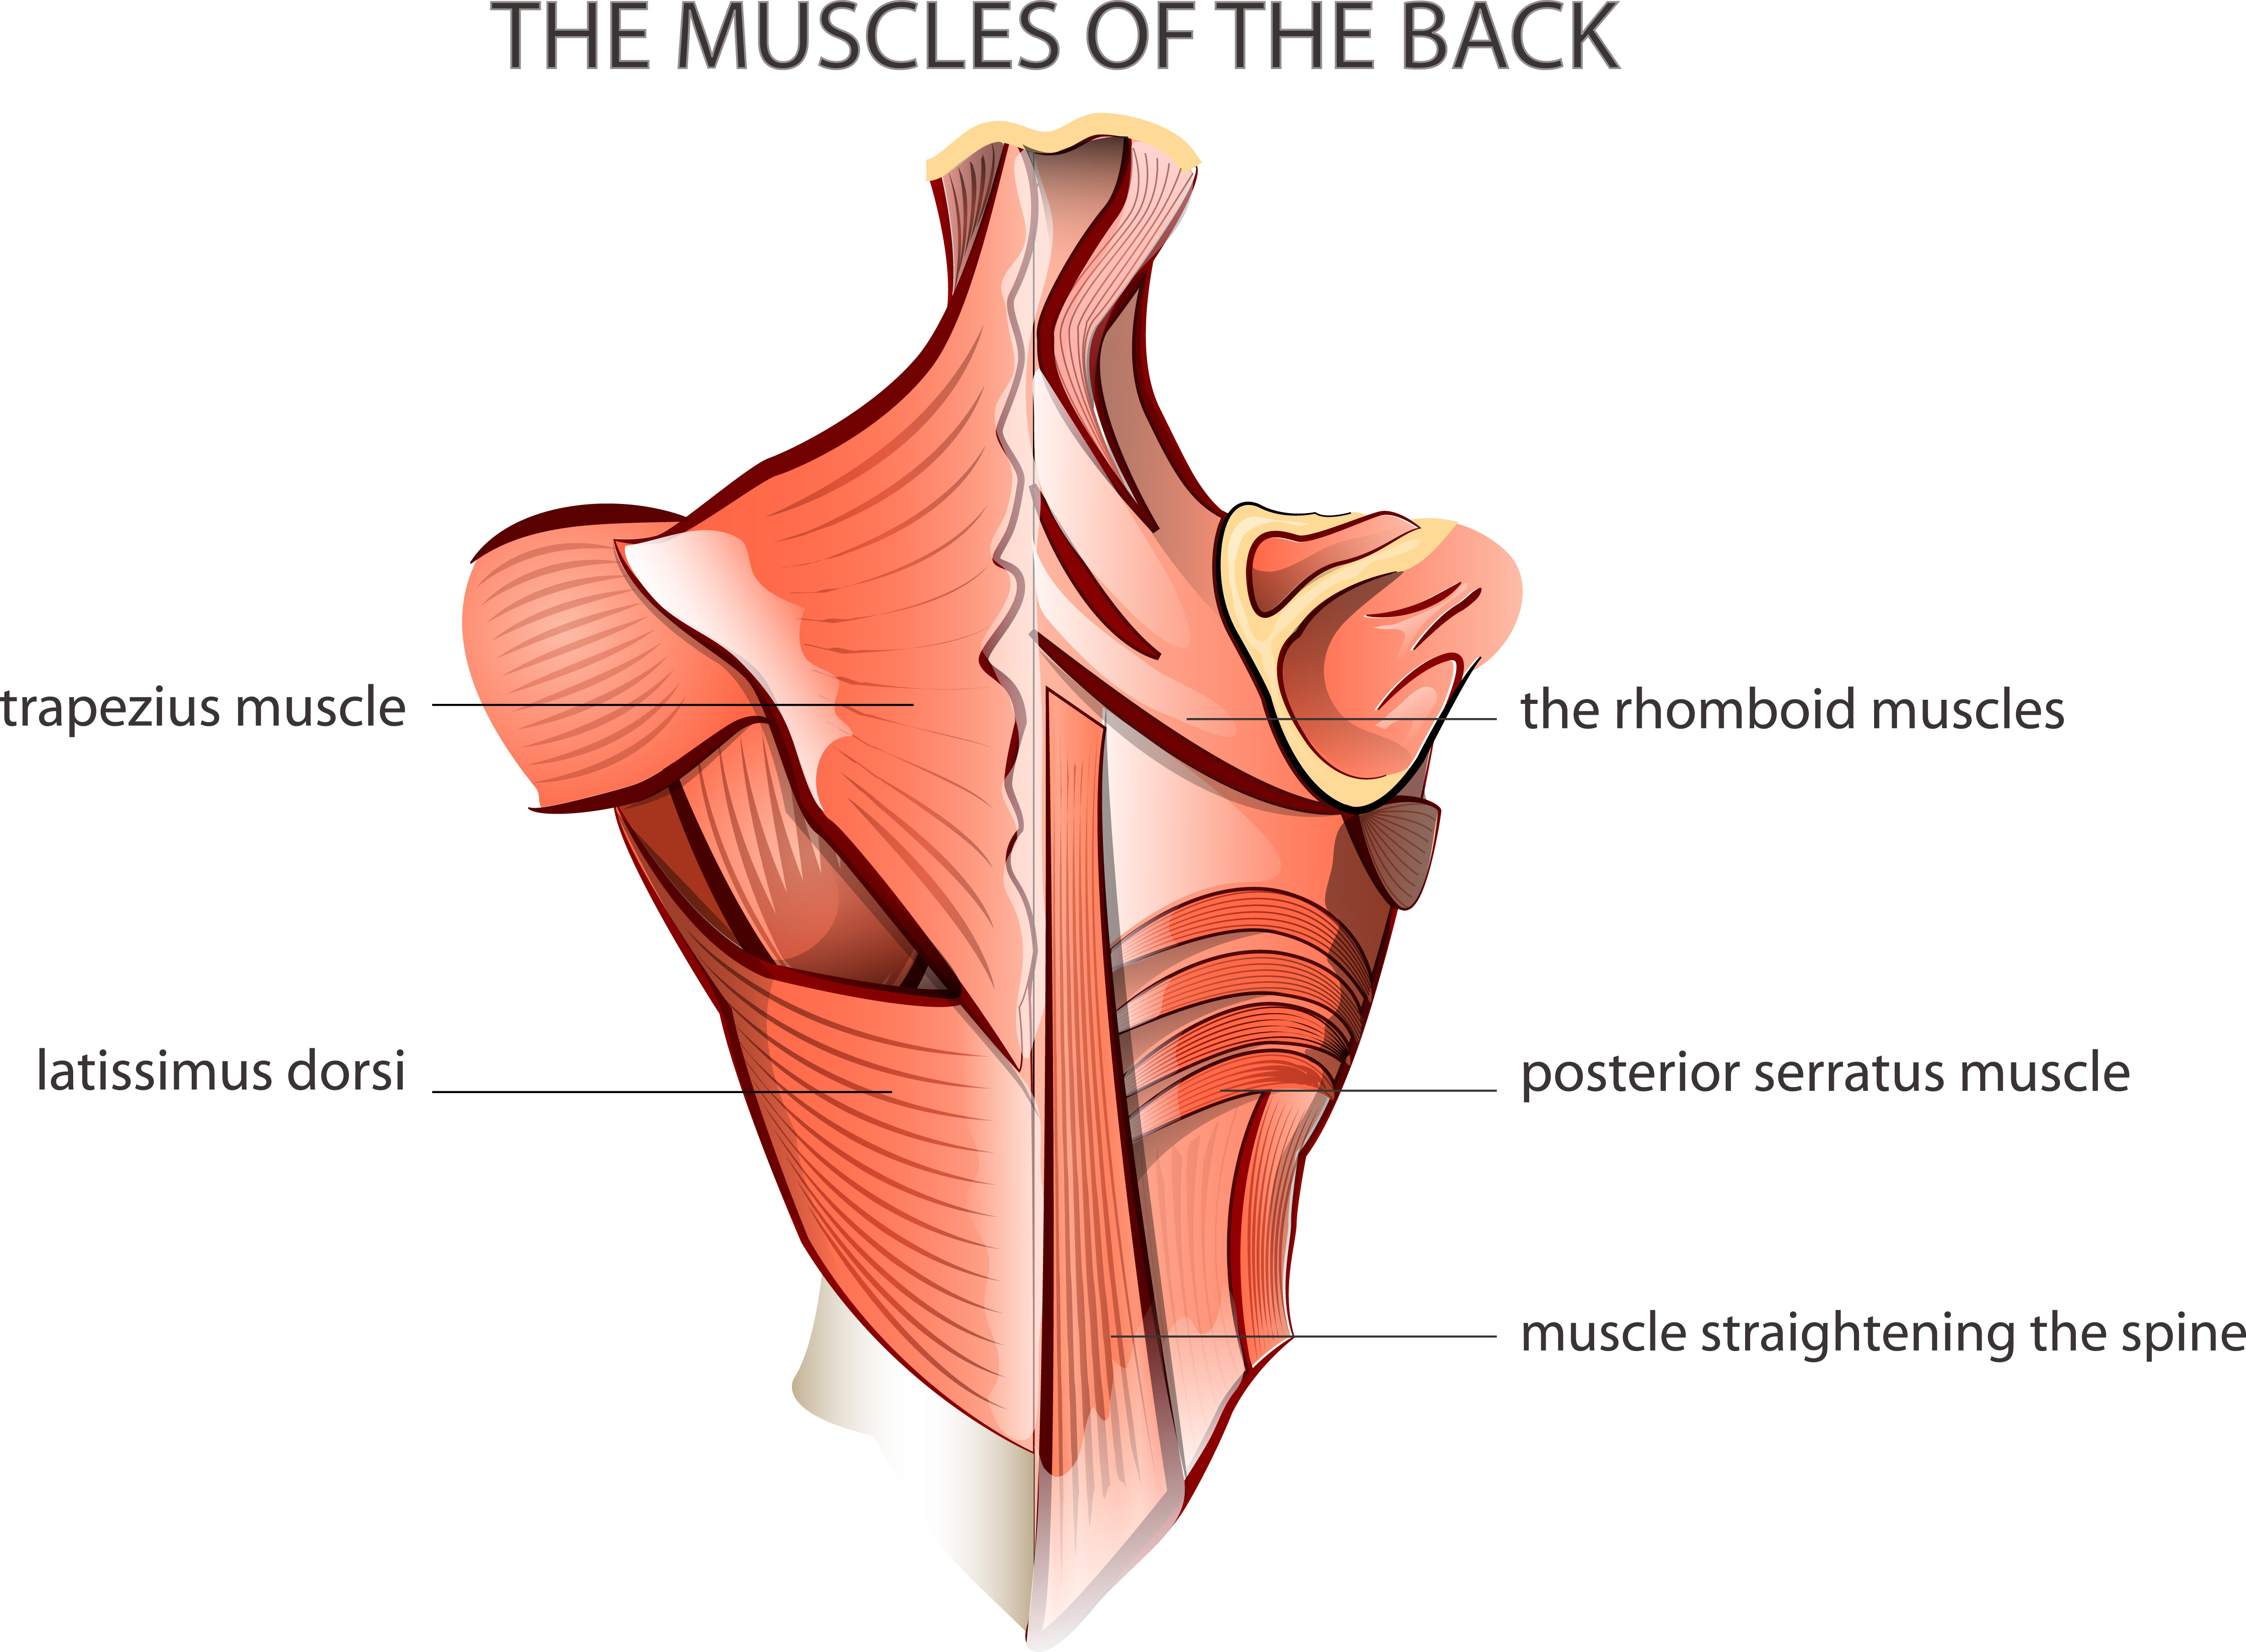 How back muscles are built?